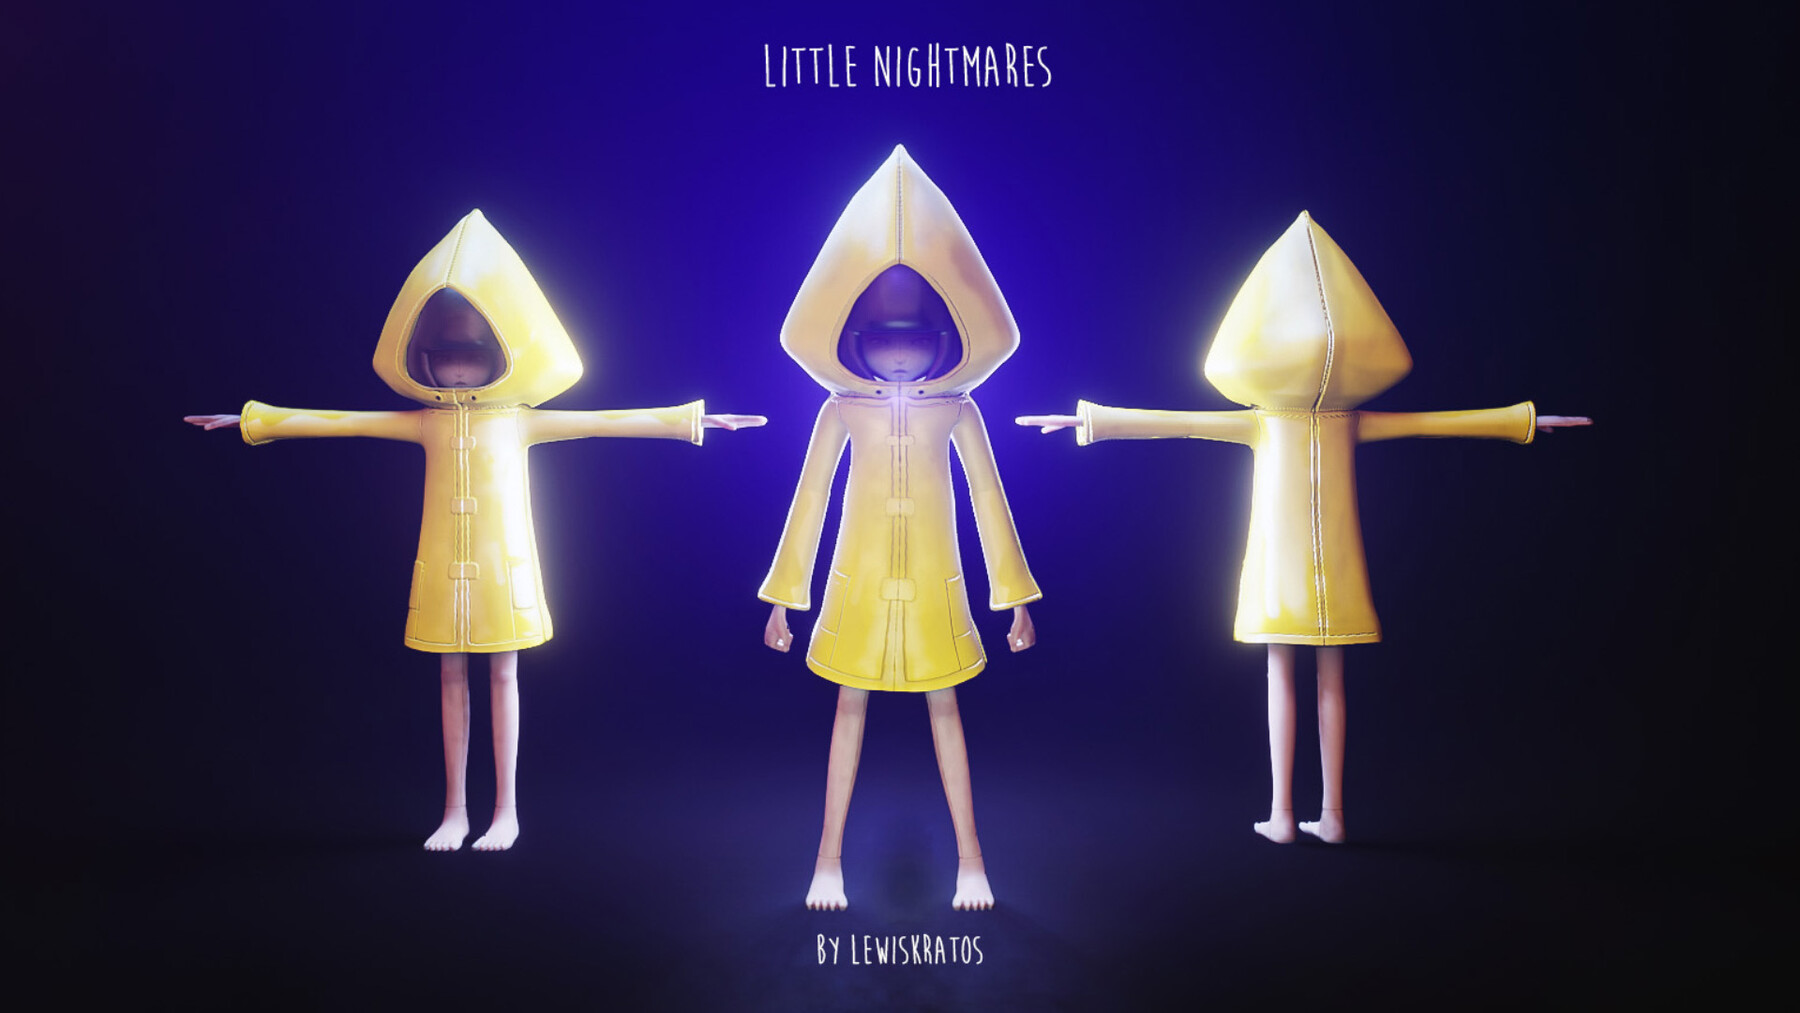 six and seven little nightmares